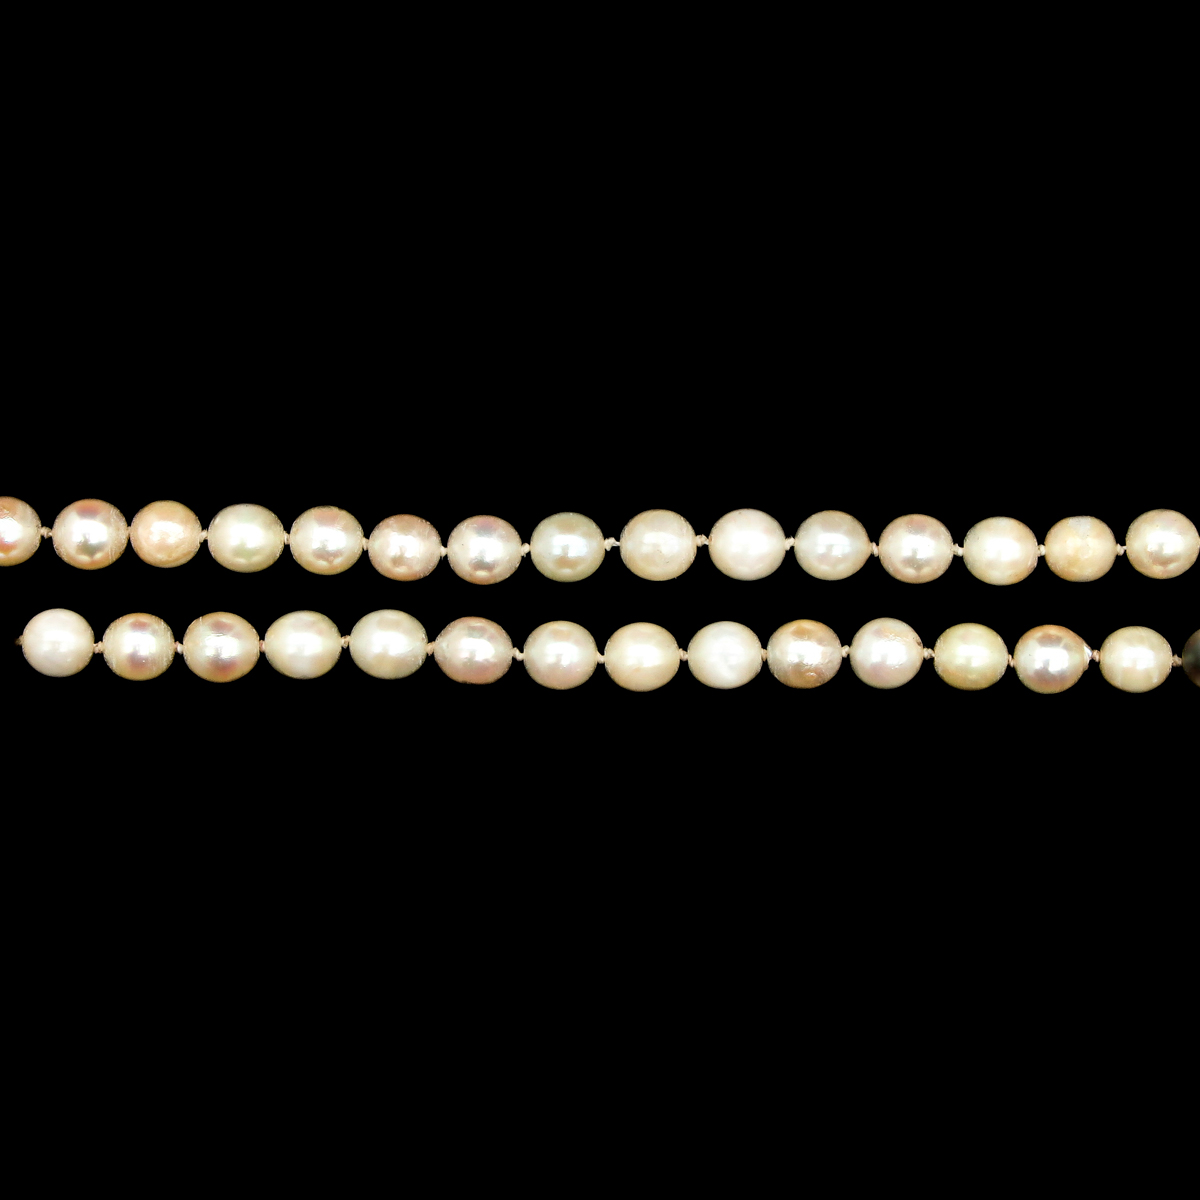 A Collection of 4 Pearl Necklaces - Image 9 of 10